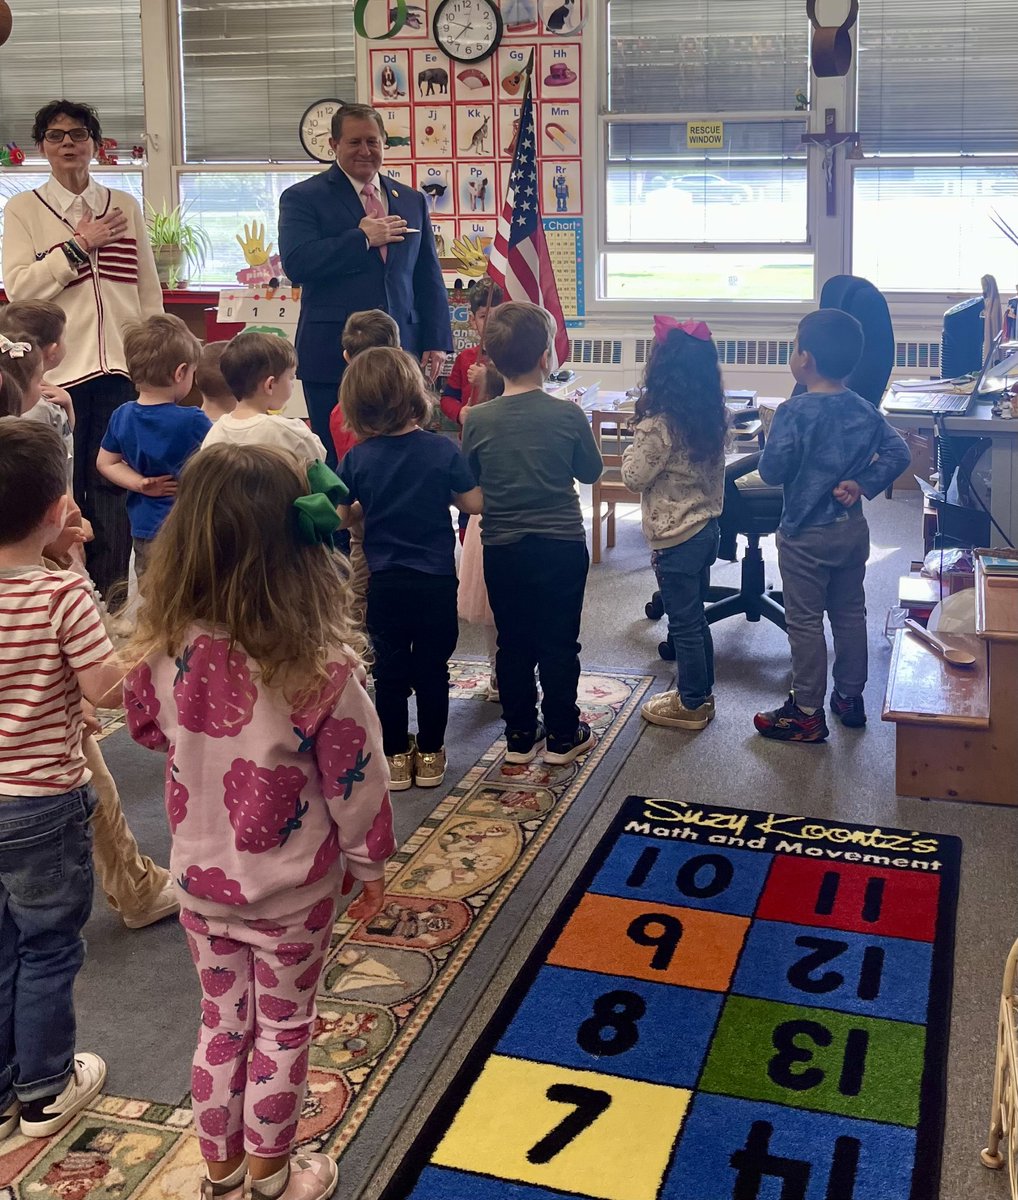 I joined my grandson Gabriel's pre-K class this morning to share some facts about my work and responsibilities as a community leader. It is for this next generation that I am inspired to work every day to create hope, opportunity, and a brighter future in America.